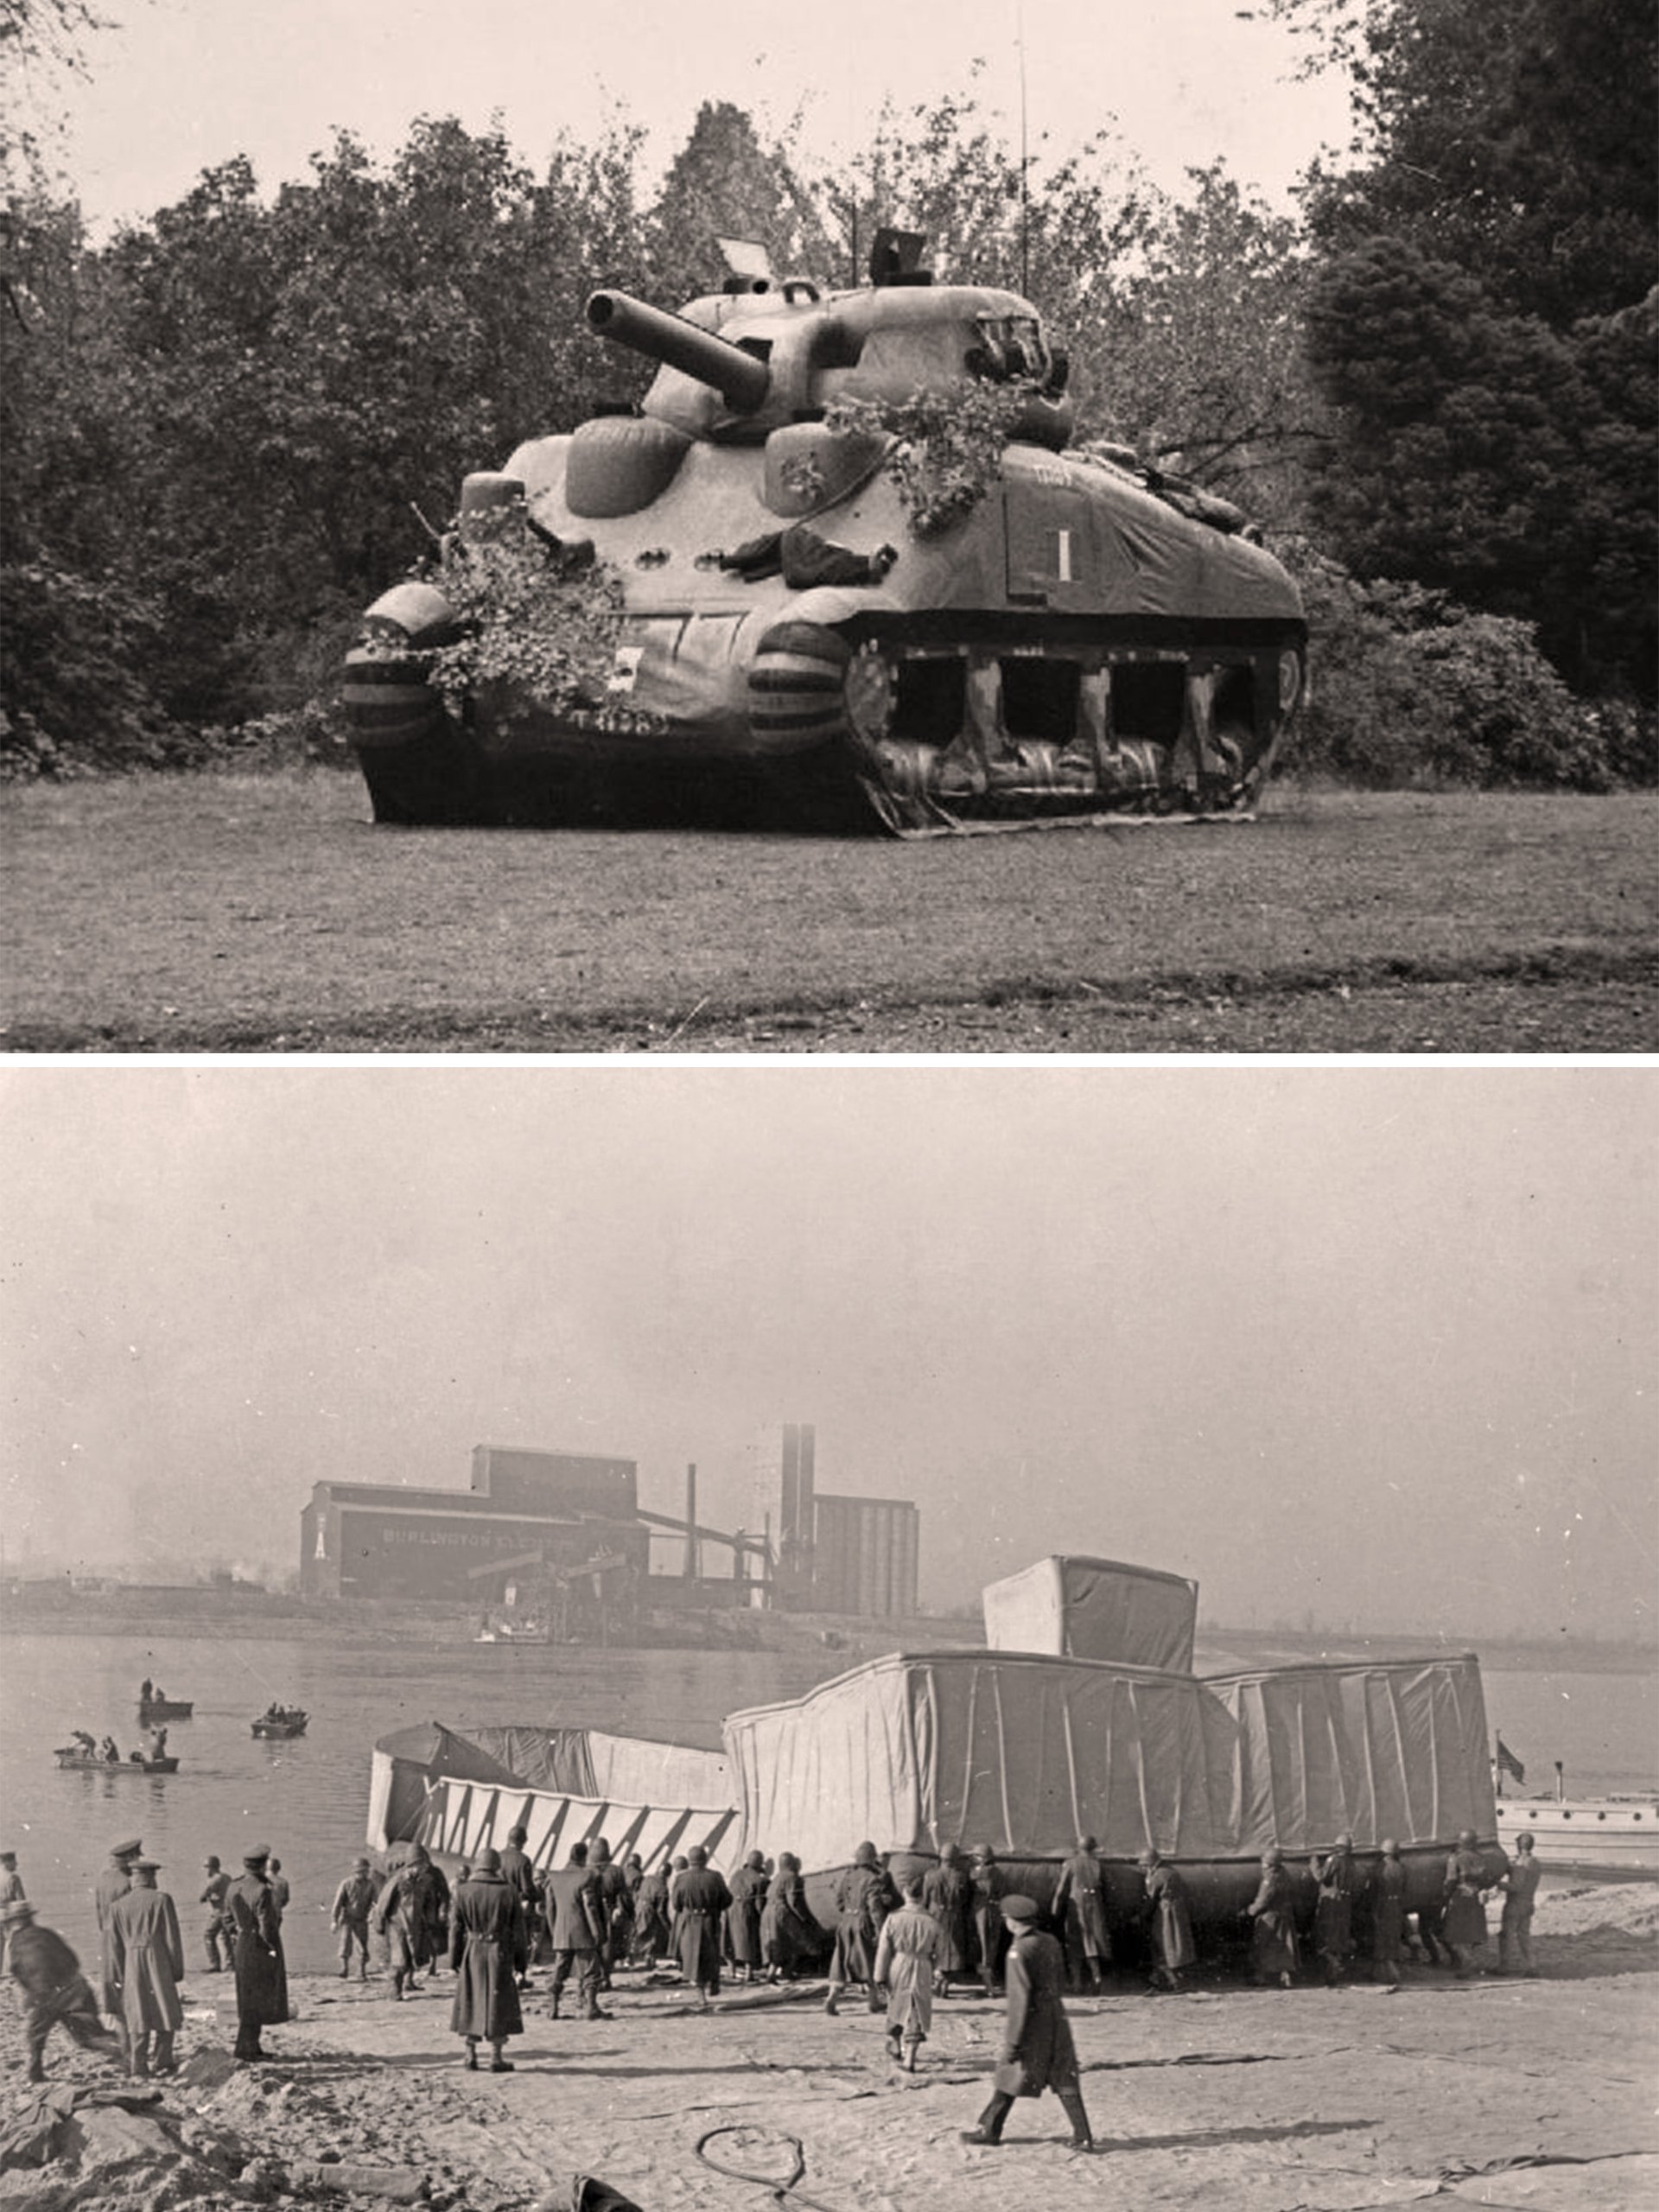 A black and white image of two photographs stacked on top of each other. The top photograph is of an inflatable tank in a field. The bottom photograph is of a group of people on a dock with a large faux landing vessel.